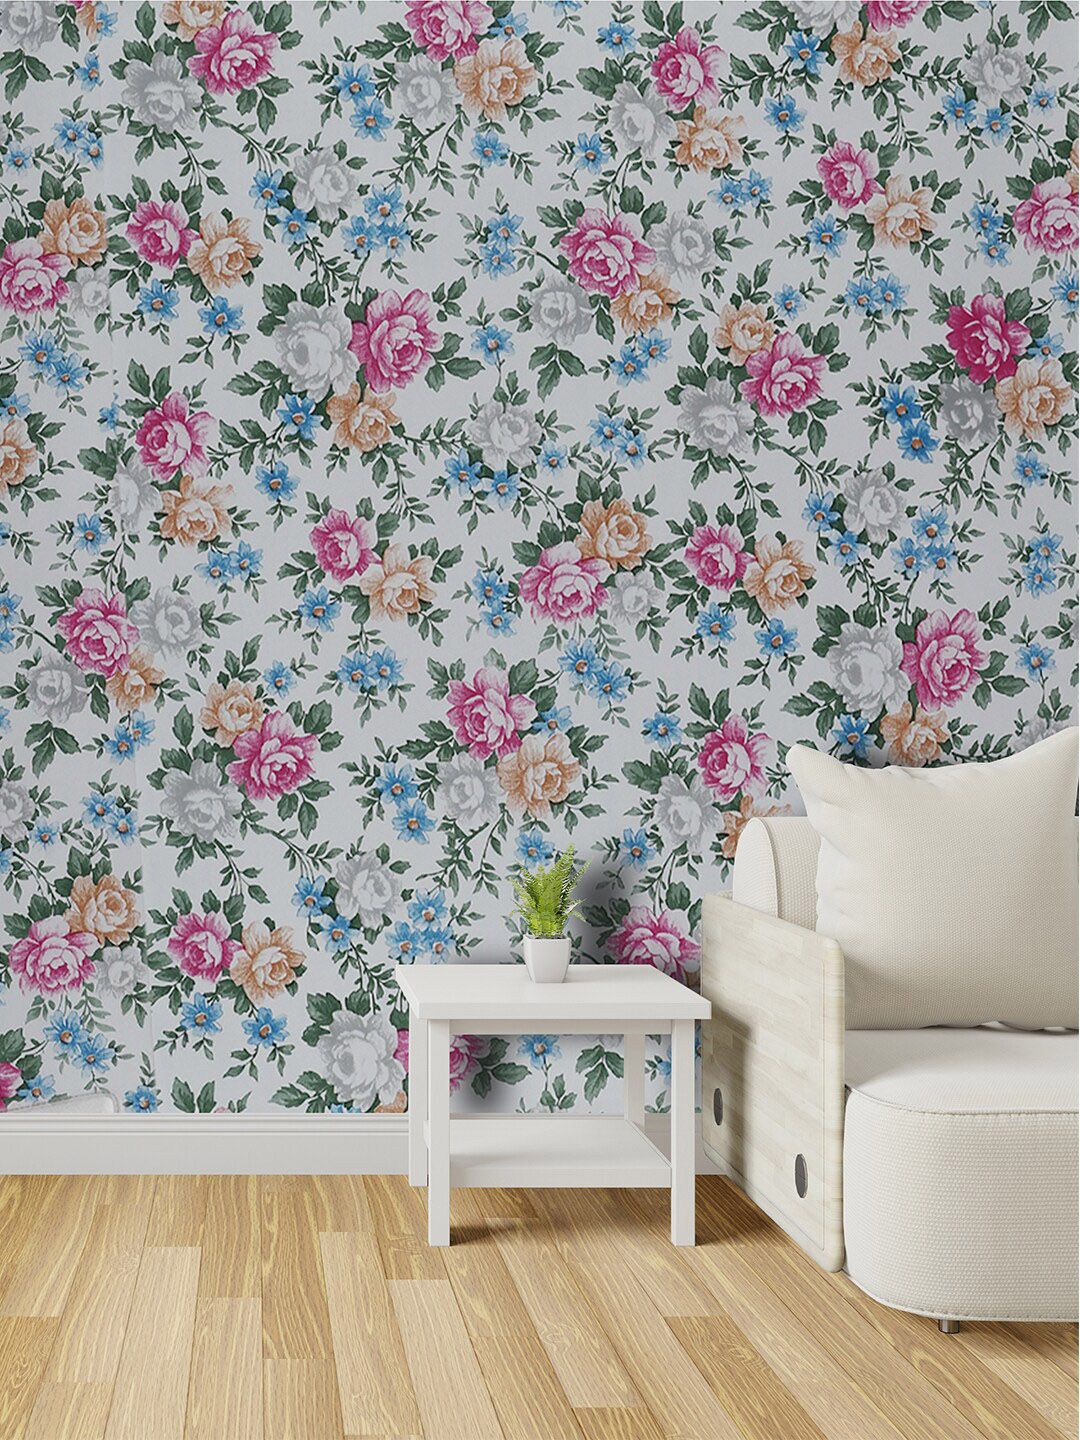 Rubix Home White & Green Floral Printed Self Adhesive Wallpaper Price in India